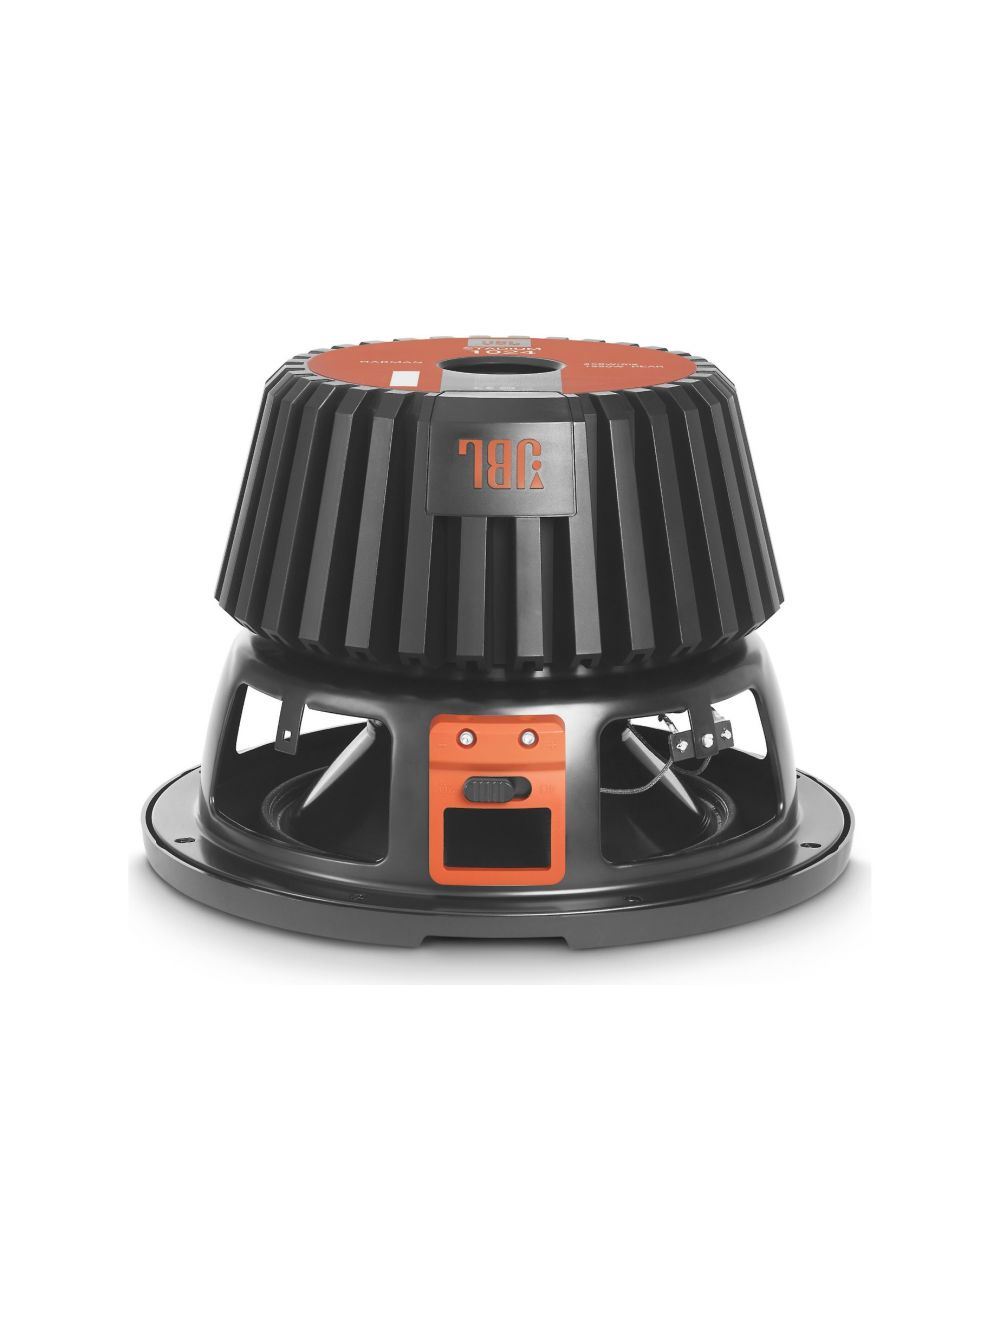 JBL Stadium 1024 10" Component Car Subwoofer with Switchable 2 or 4 ohm Impedance